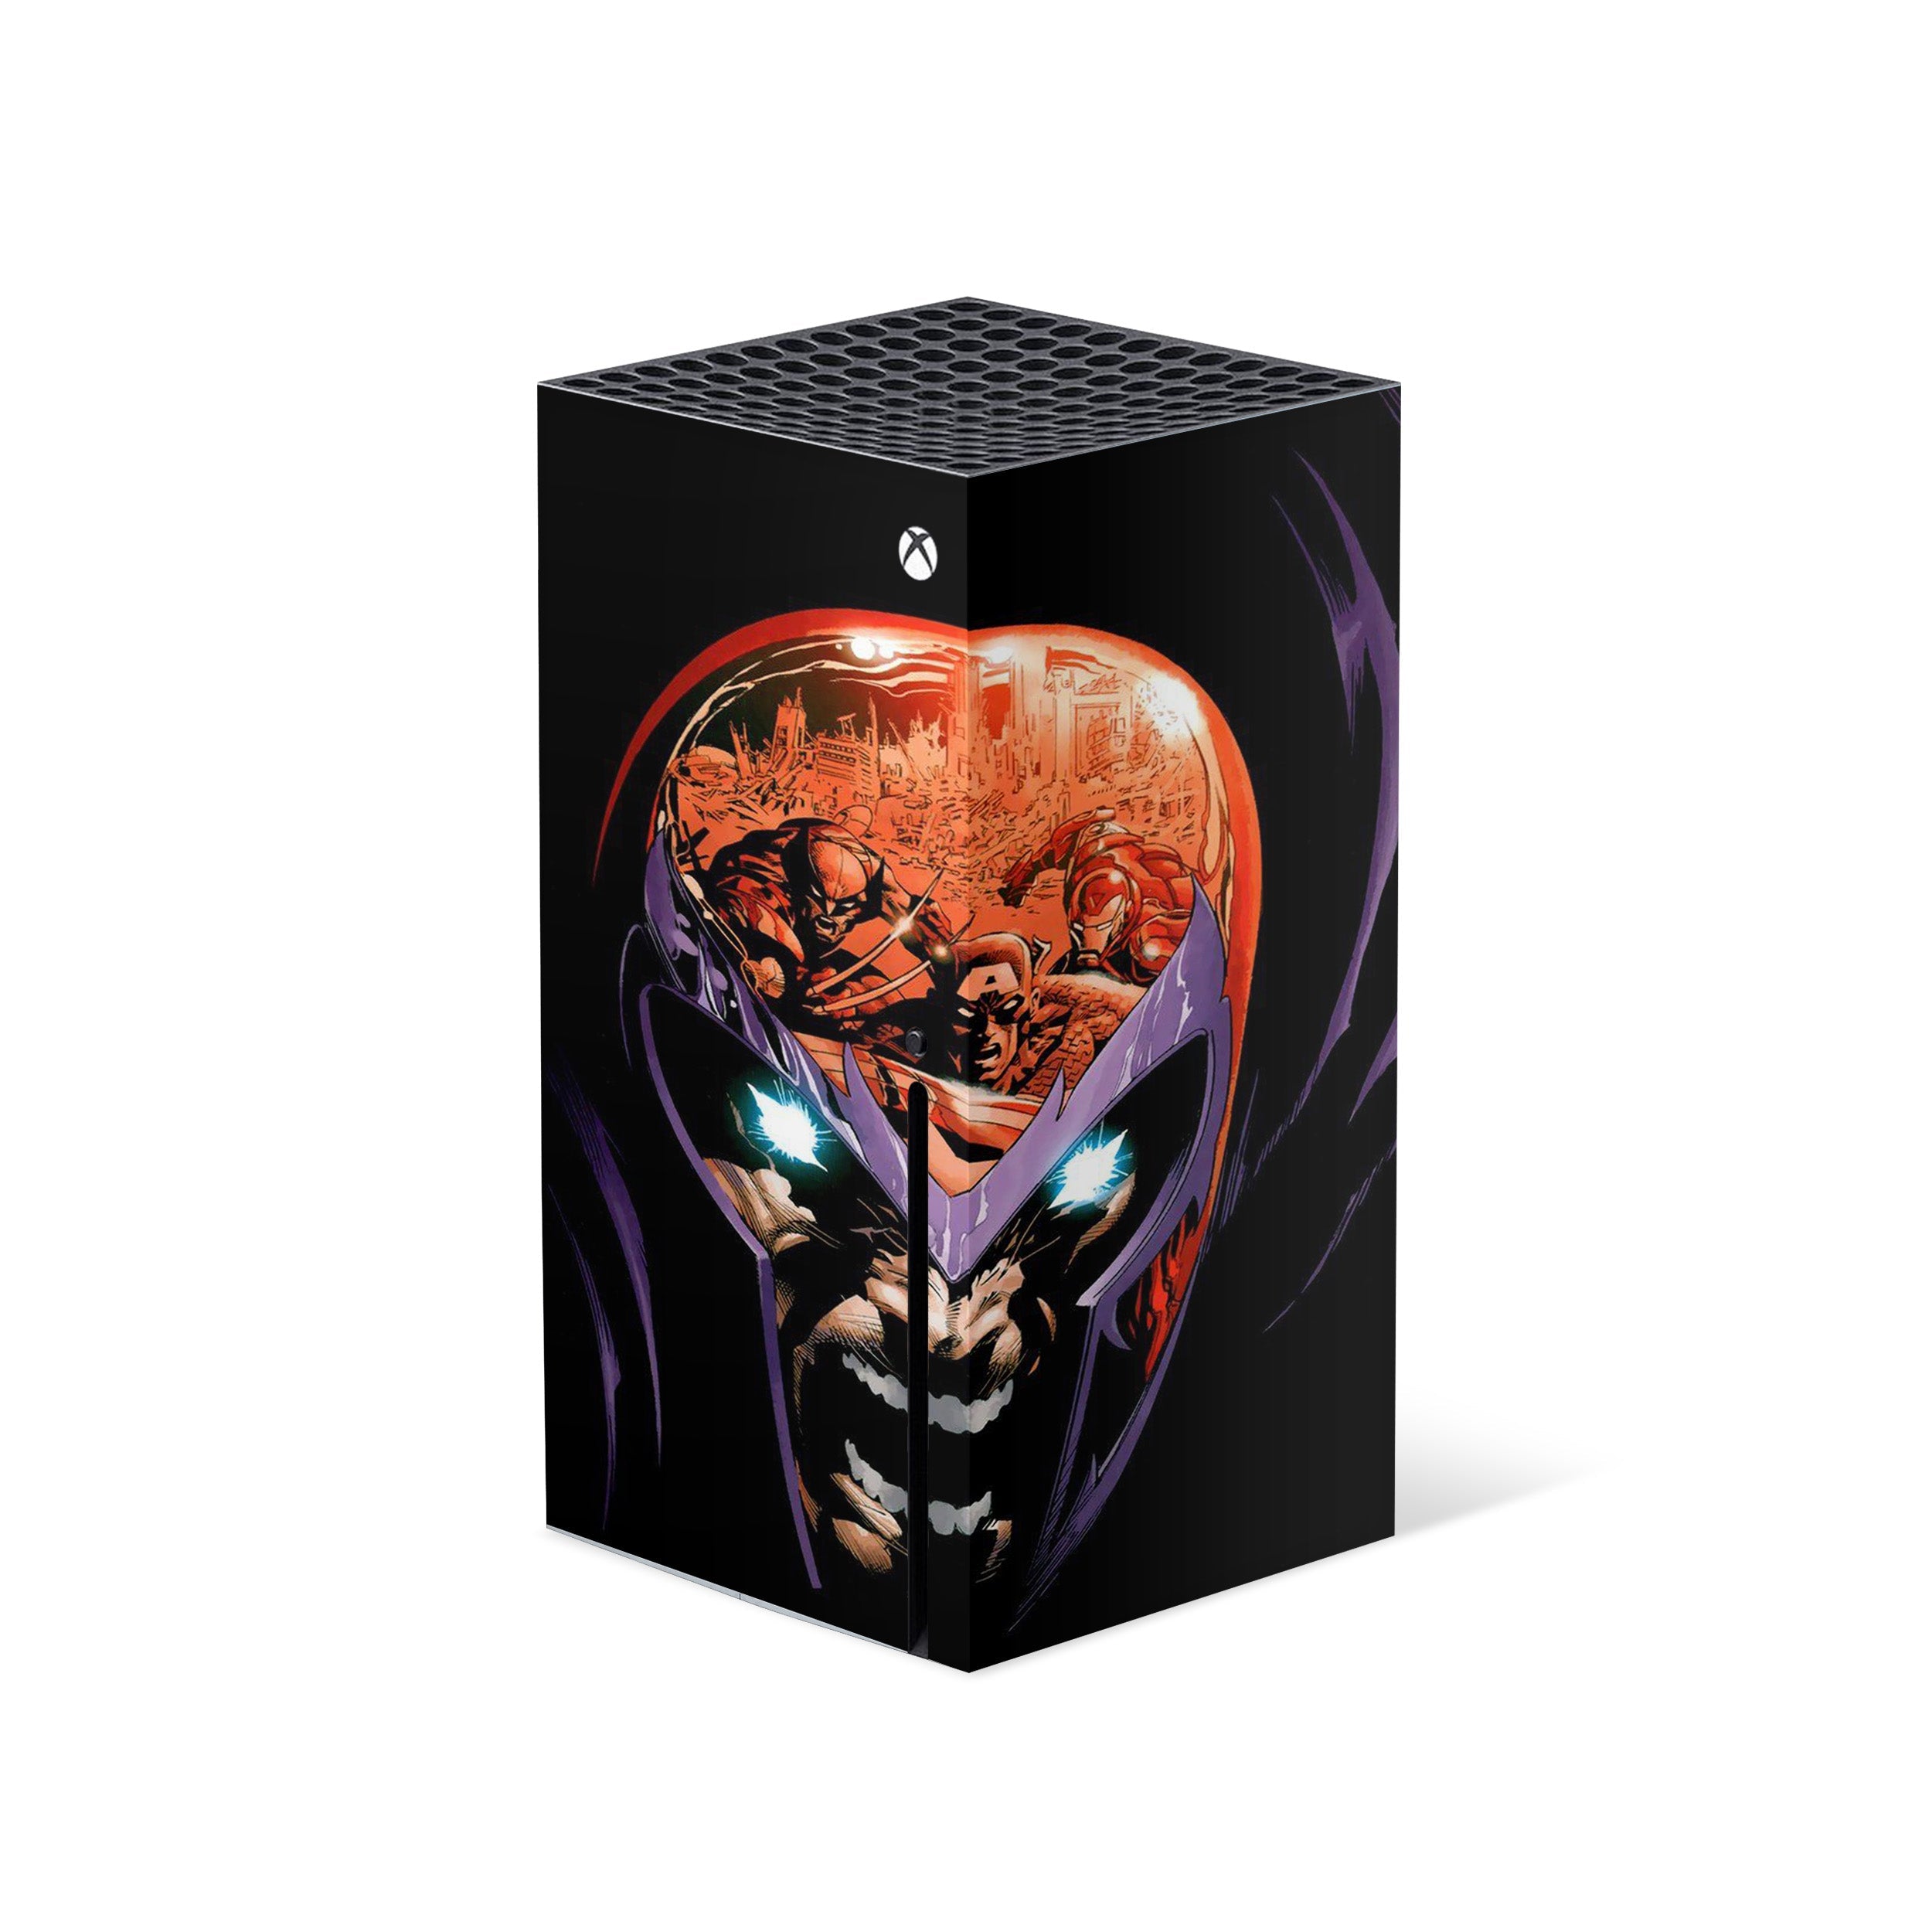 A video game skin featuring a Marvel X Men Magneto design for the Xbox Series X.